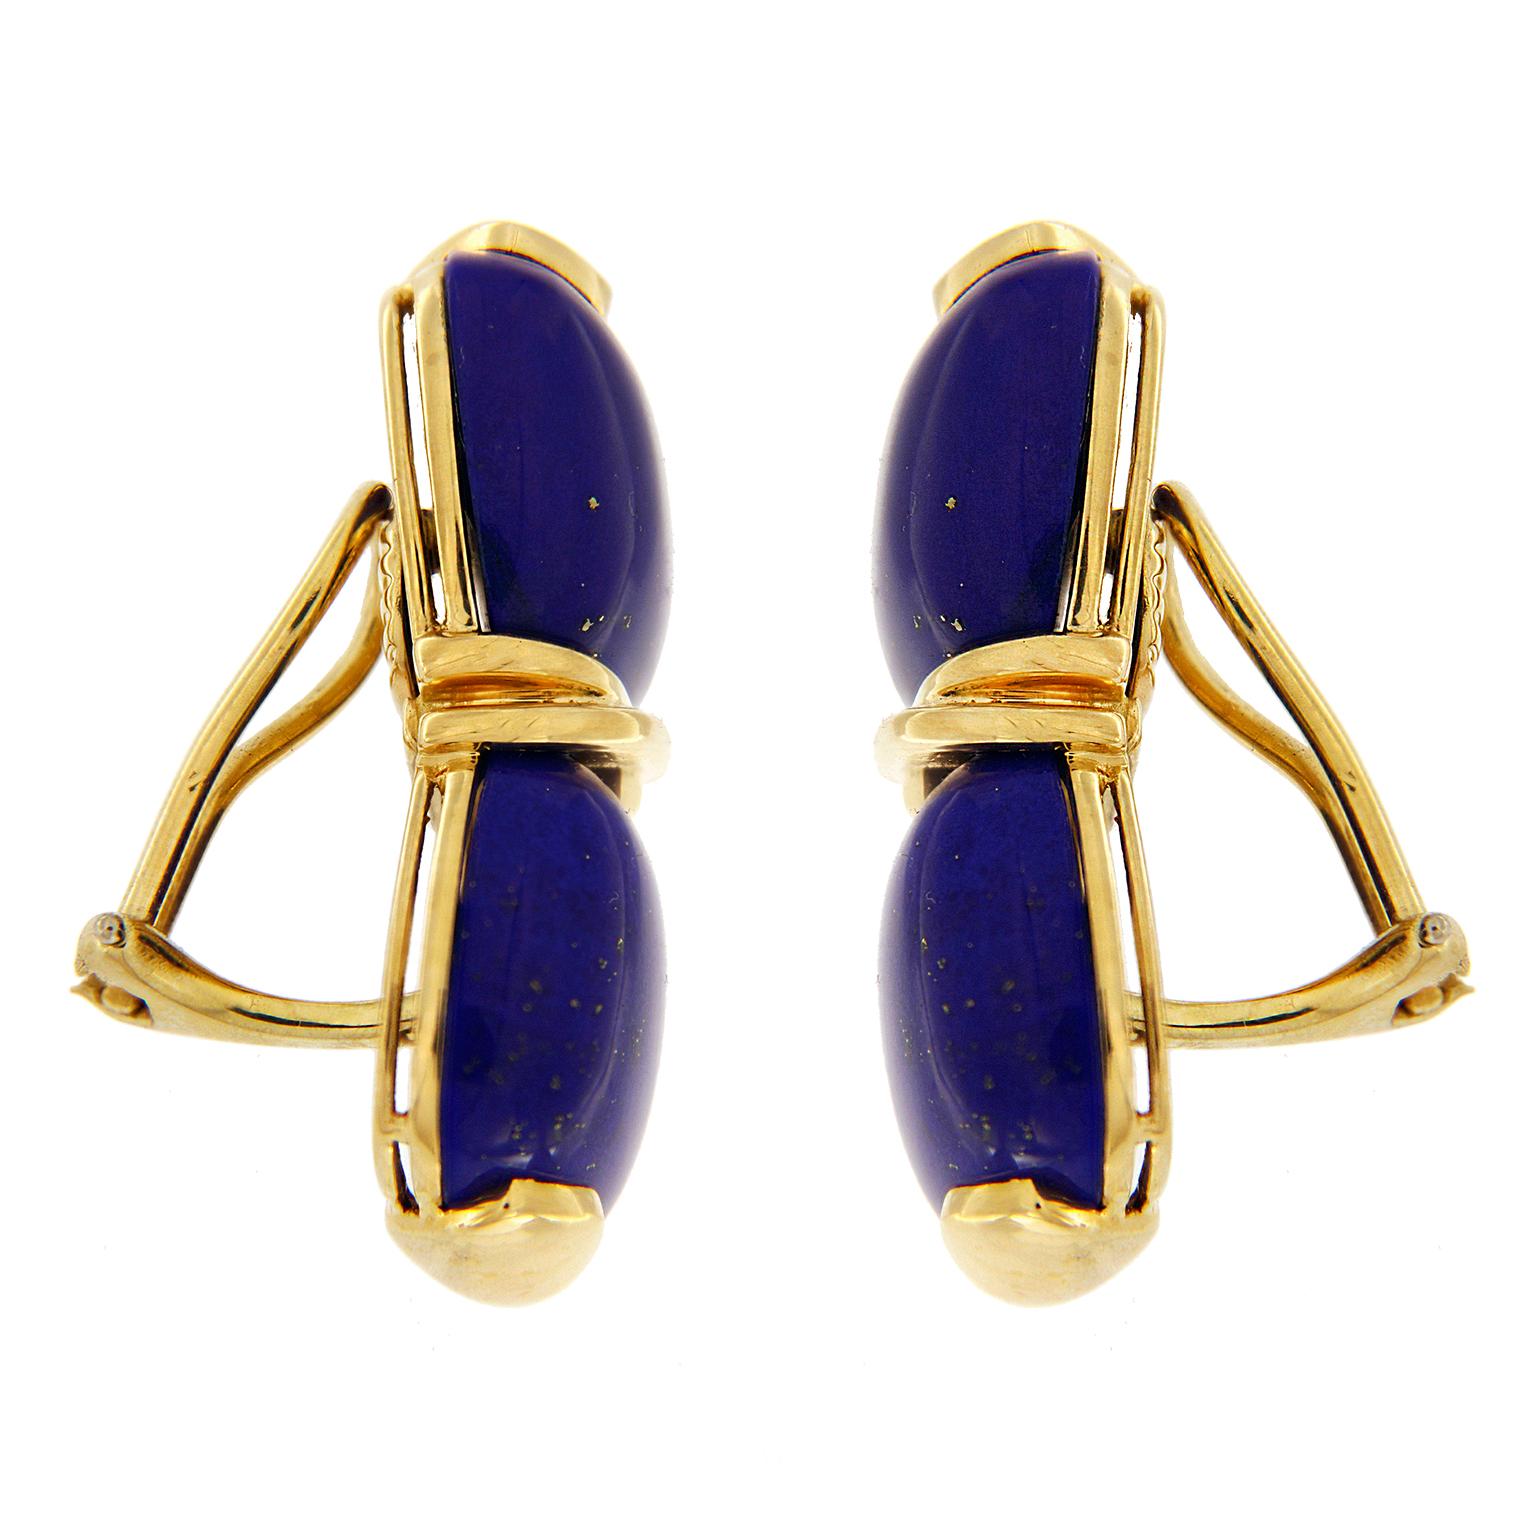 Valentin Magro Double Lapis Cushion Cabochon Earrings are adorned in blue and gold. The bodies are lapis lazuli carved into cushion shaped cabochons. These are mounted two to an earring, with an 18k yellow gold crisscross in between. This gives the